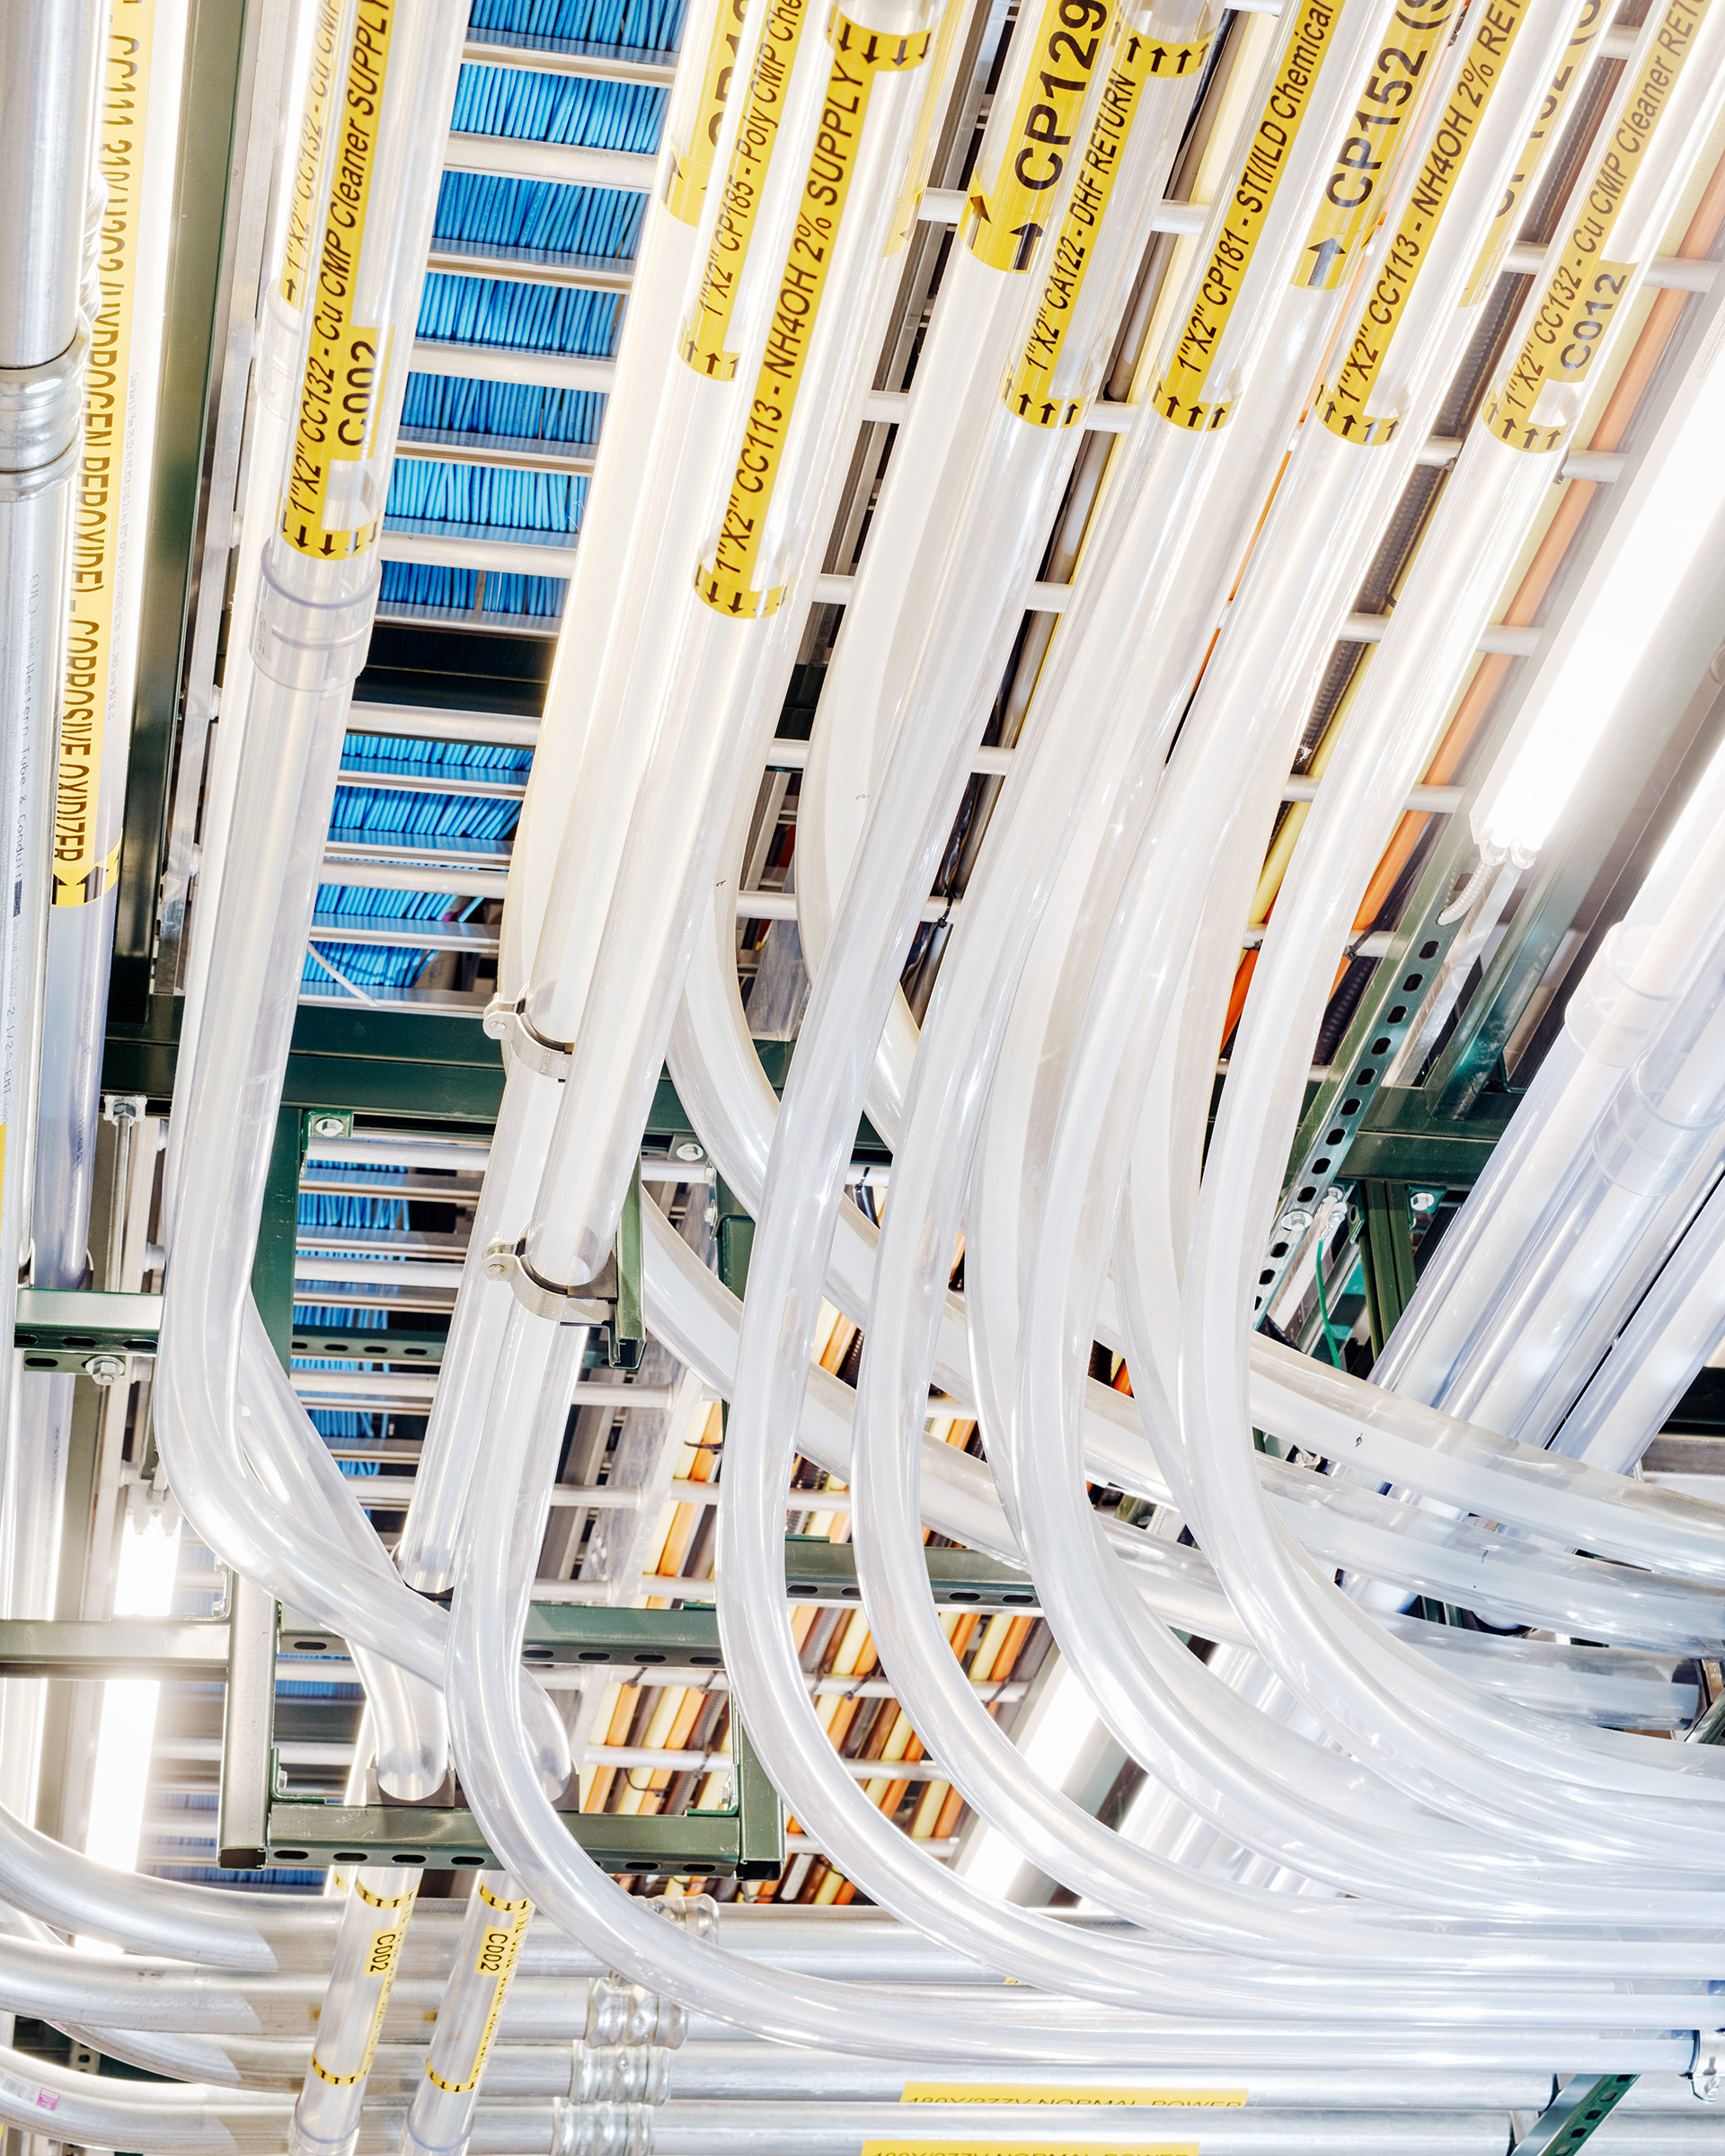 Chemical lines in the Globalfoundries fab in Malta, N.Y. (Thomas Prior for TIME)